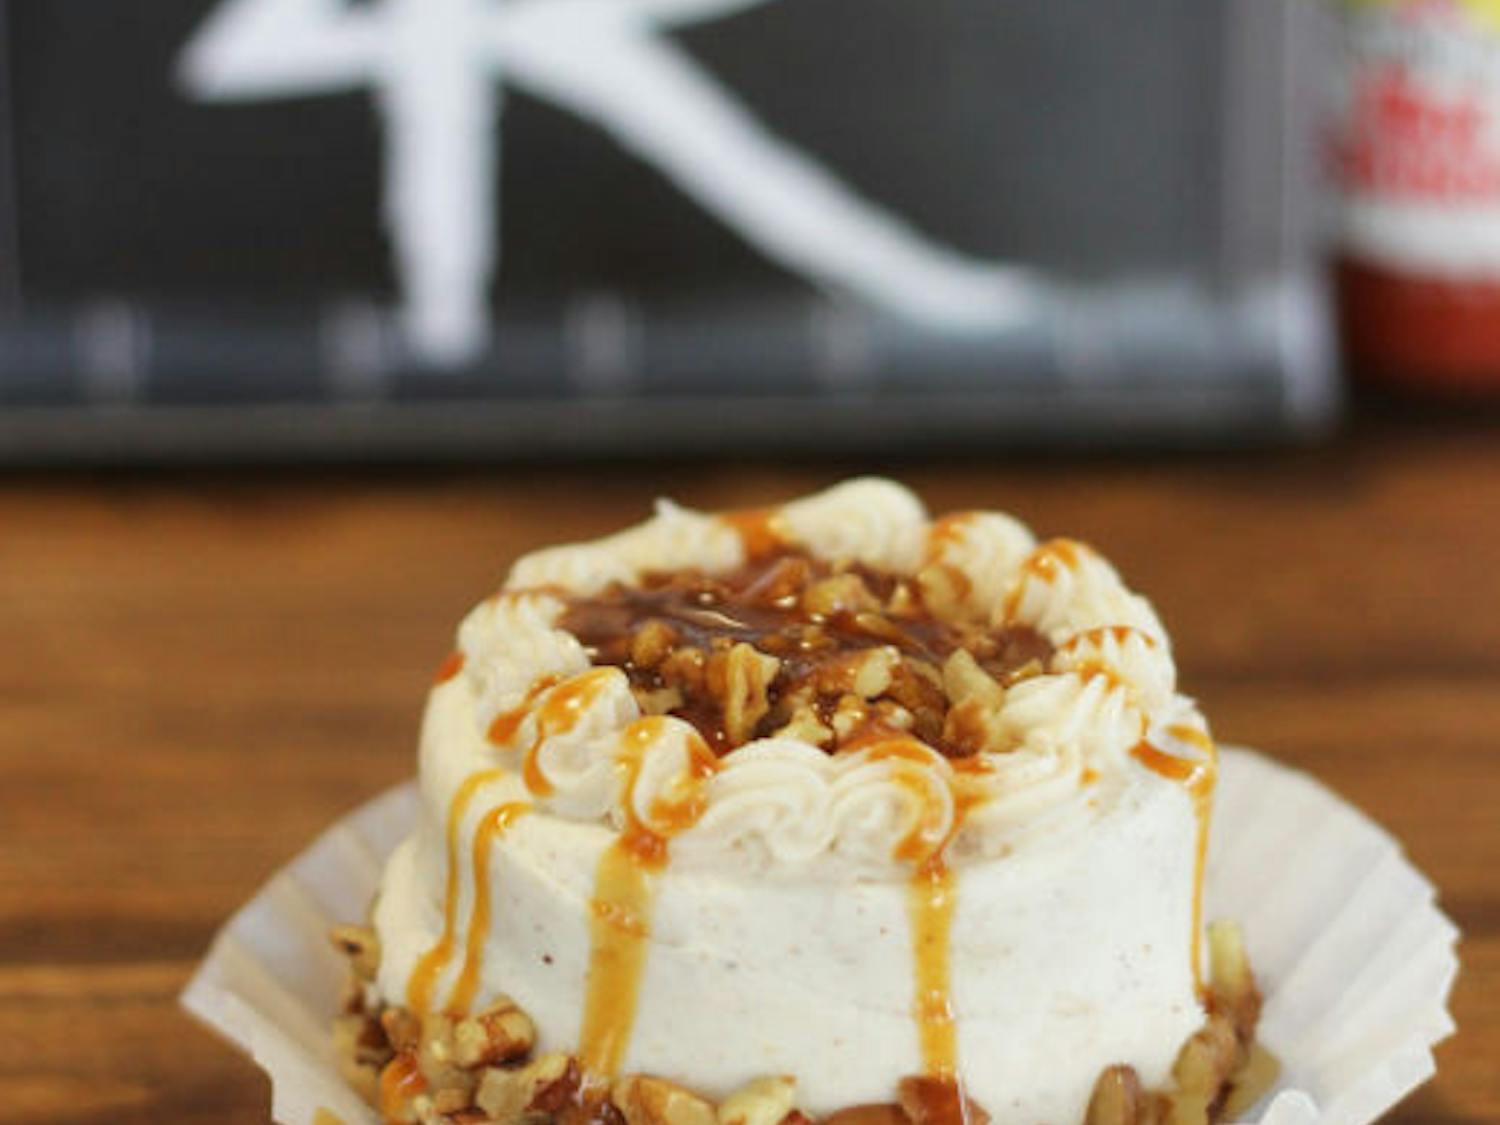 4 Rivers Smokehouse’s Sweet Shop debuted its fall desserts, which include the pumpkin creme bombe, a pumpkin cake filled with vanilla bean mousse and frosting topped with toasted pecans and caramel. Also available are products like the pumpkin bayou bar and pumpkin whoopie pie.